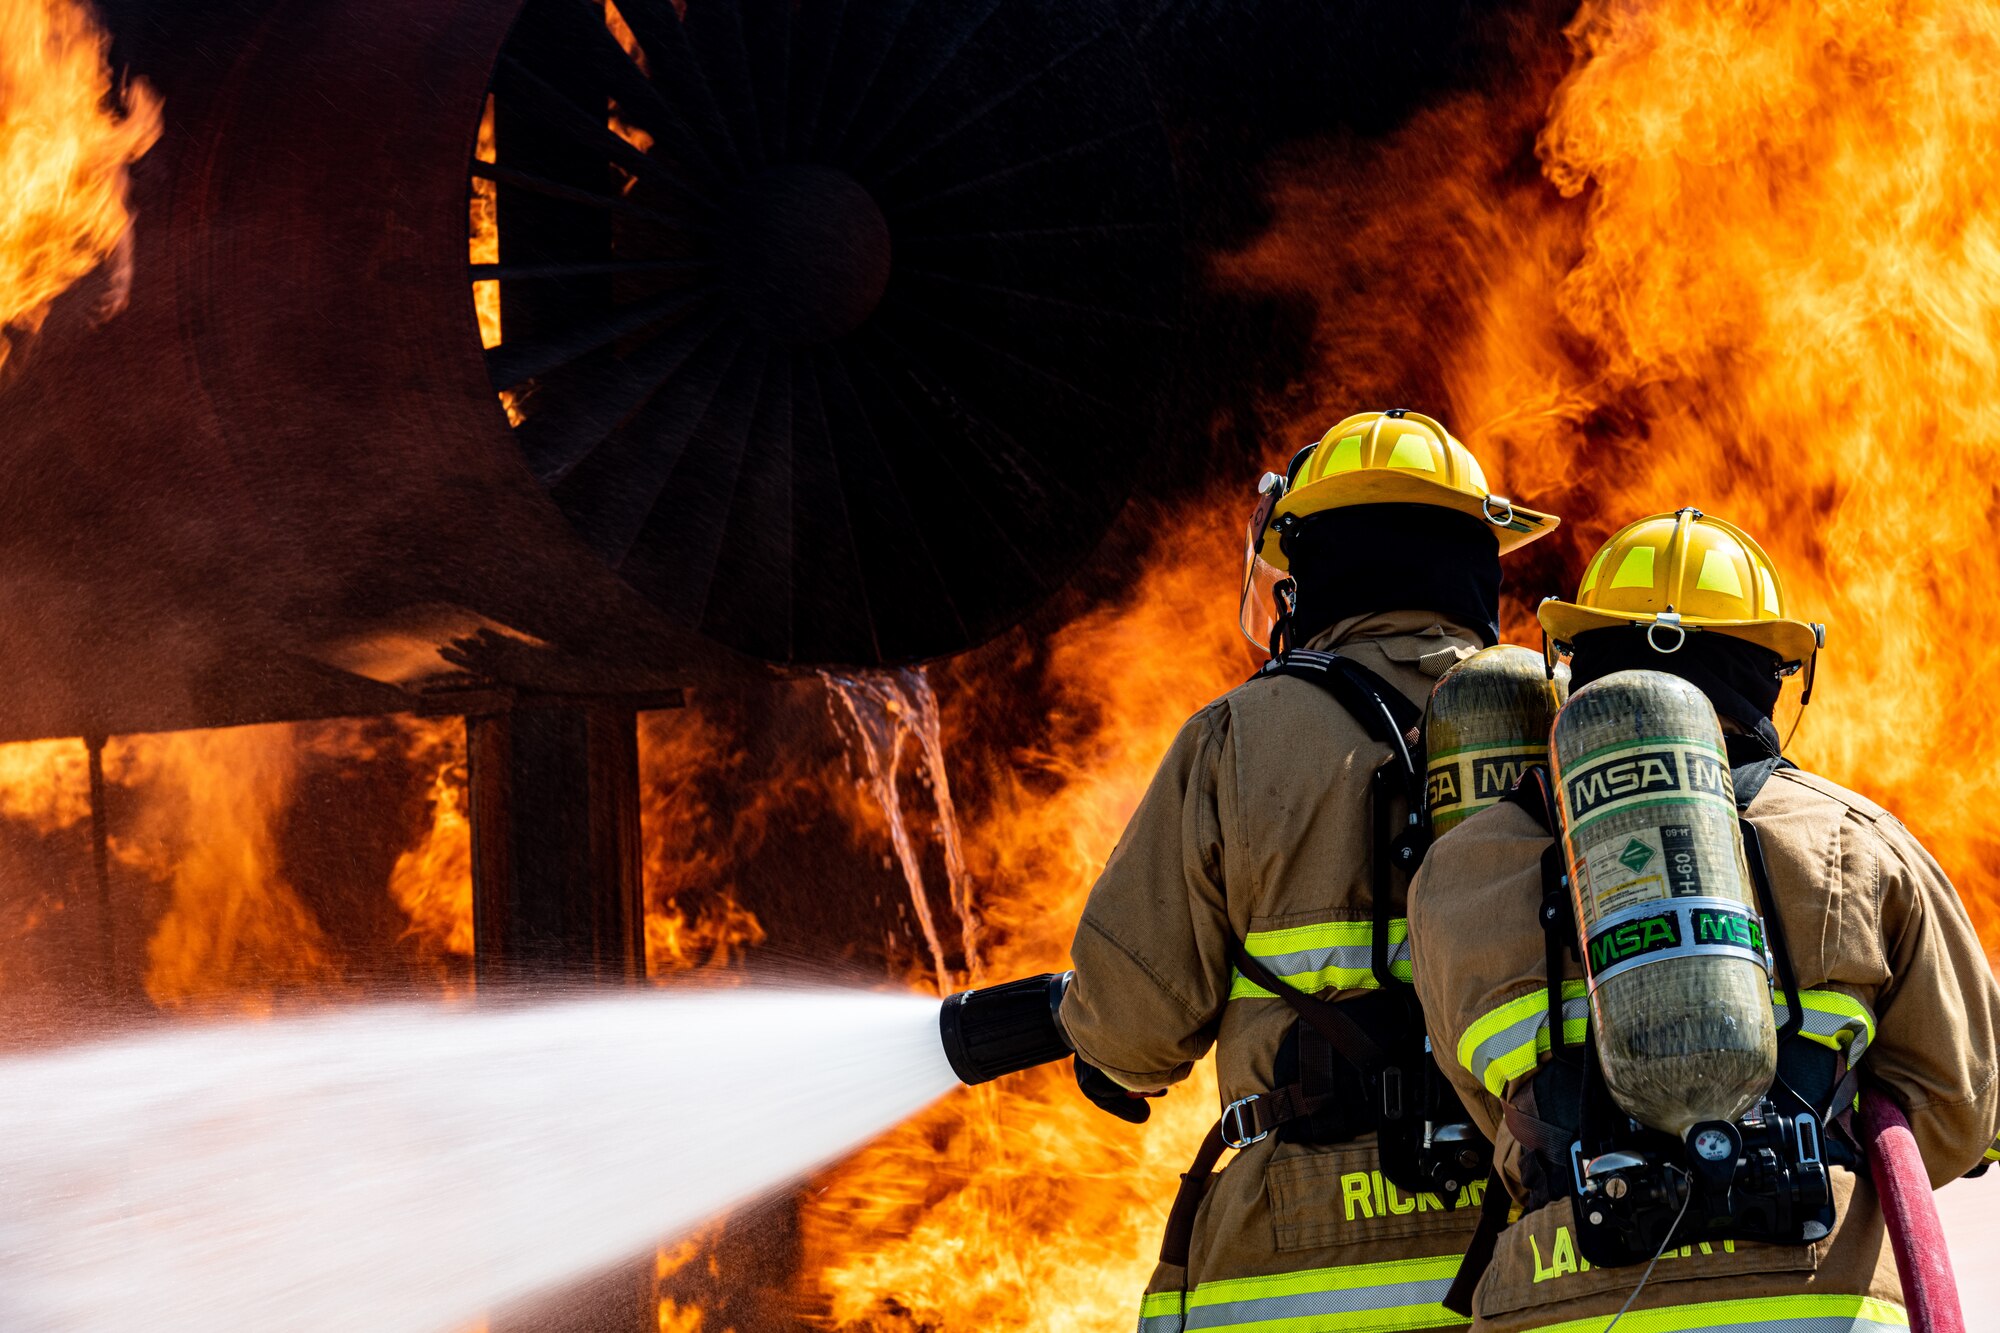 Firefighters from Rickenbacker Air National Guard fight an external aircraft fire, Sept. 9, 2020, at Youngstown Air Reserve Station’s burn pit. About 40 Citizen Airmen from RANG’s fire department came to the 910th Airlift Wing, Sept. 8-10, to do their annual live-fire training.